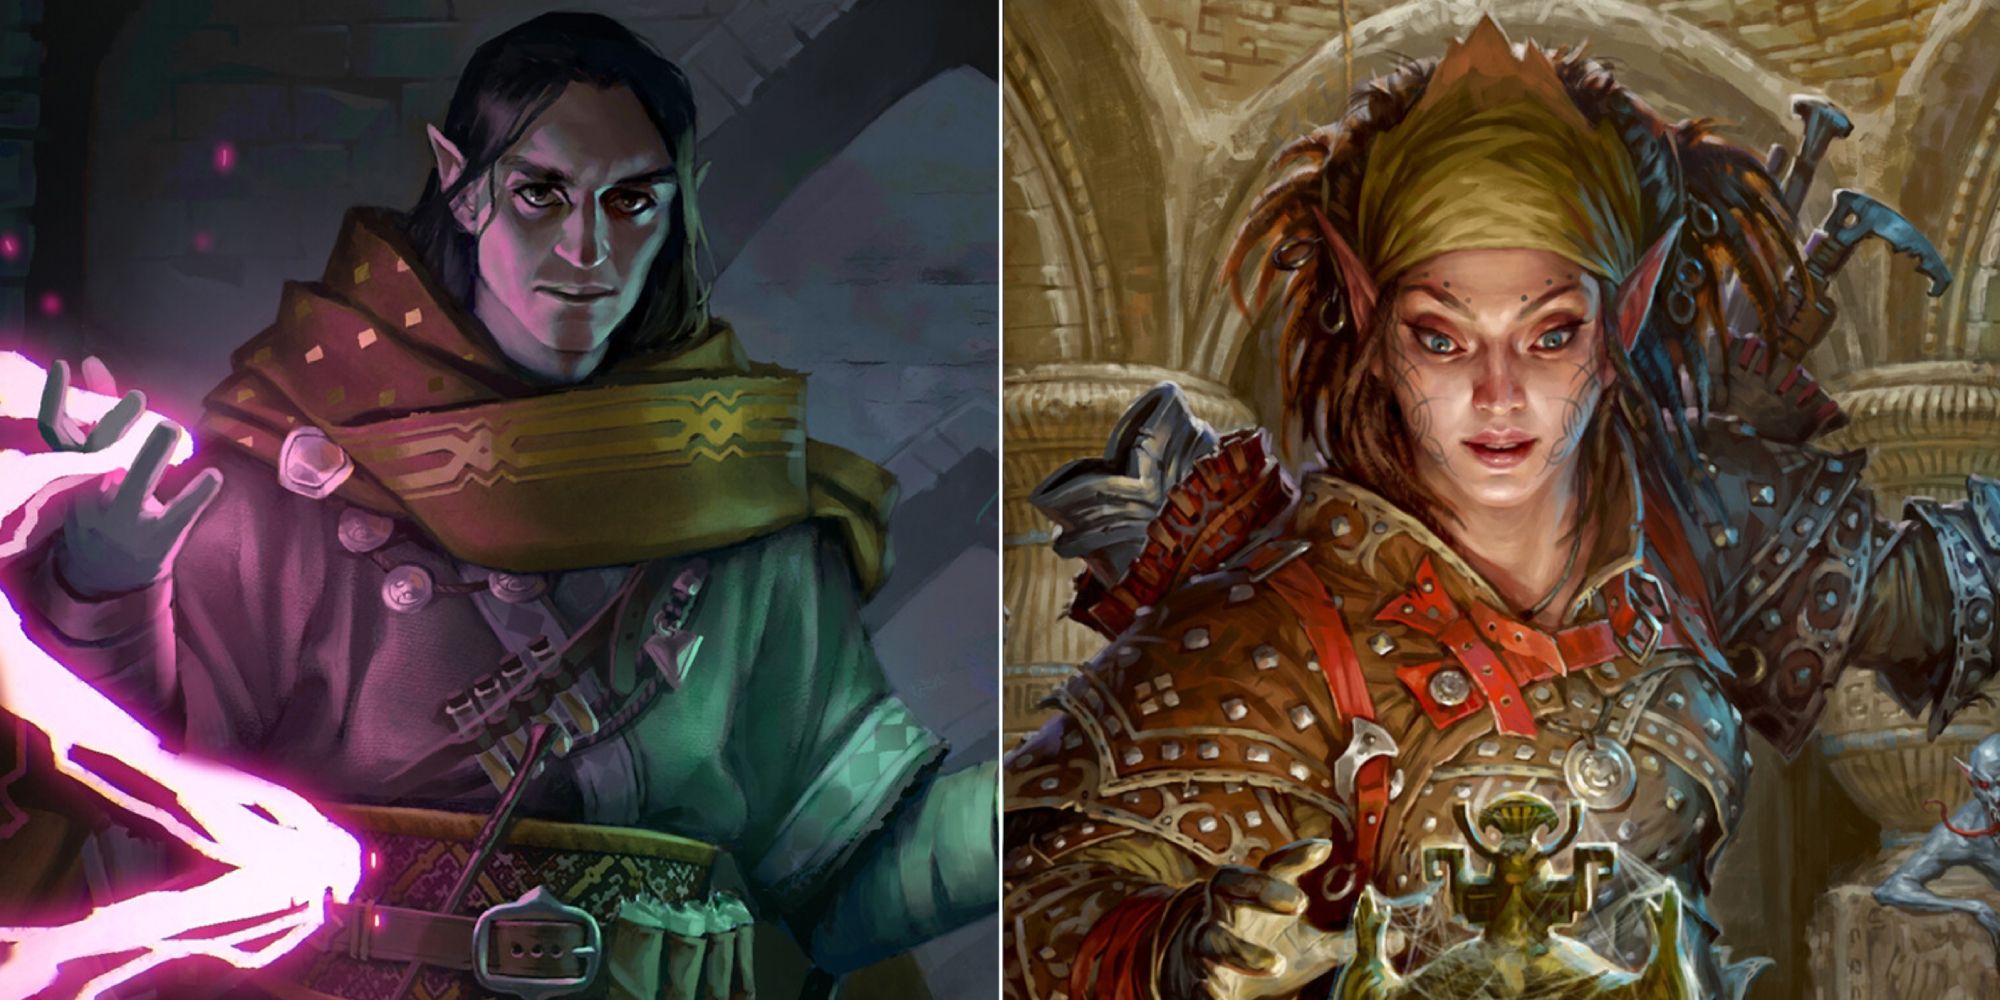 An elf mage and an elven explorer featured image